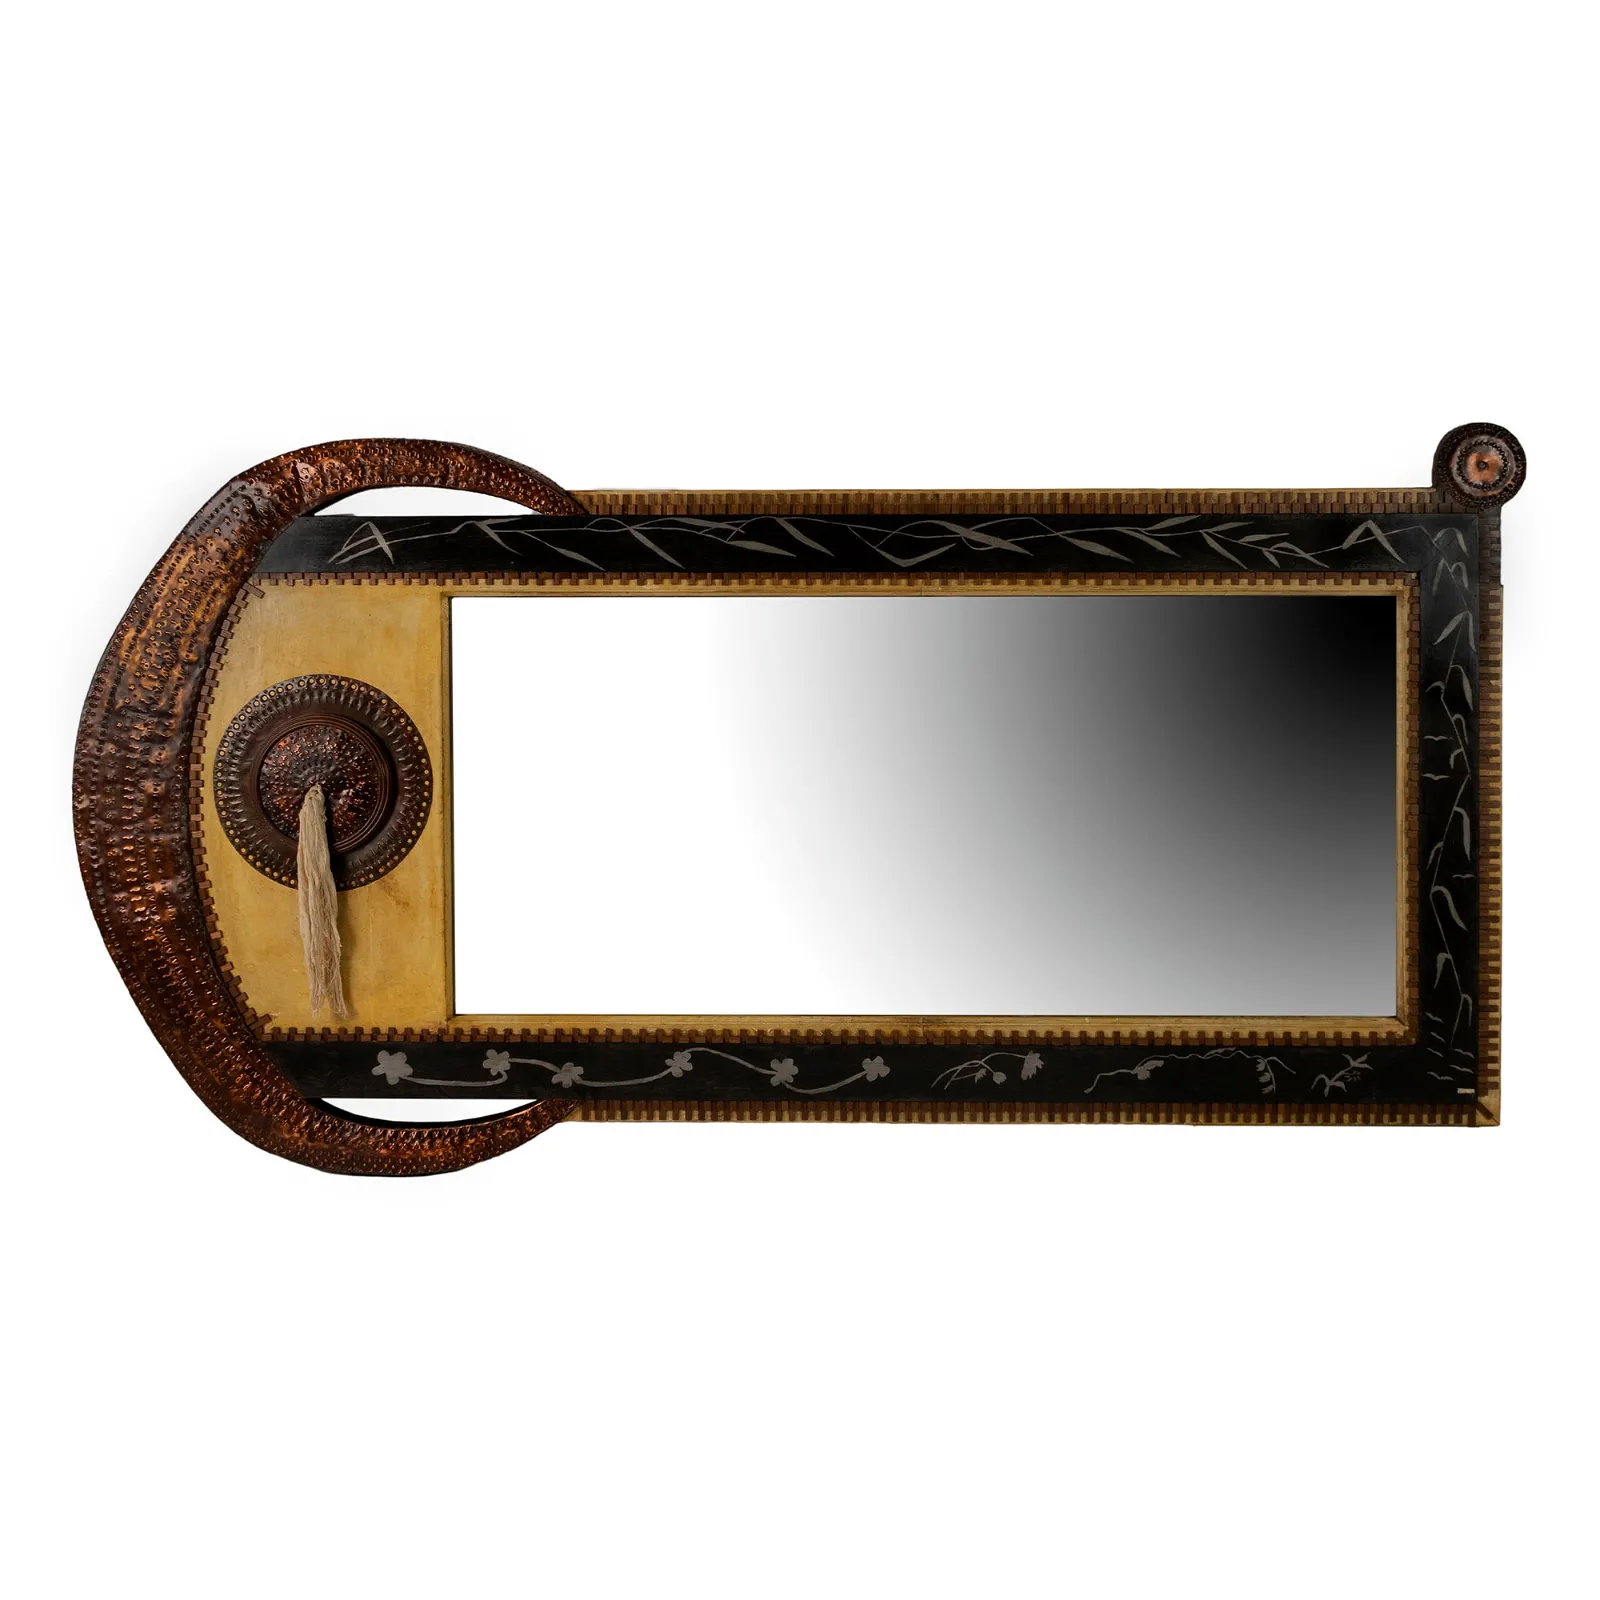 Large mirror by Carlo Bugatti, which sold for €11,000 ($11,910, or $15,480 with buyer’s premium) at Bolli & Romiti.